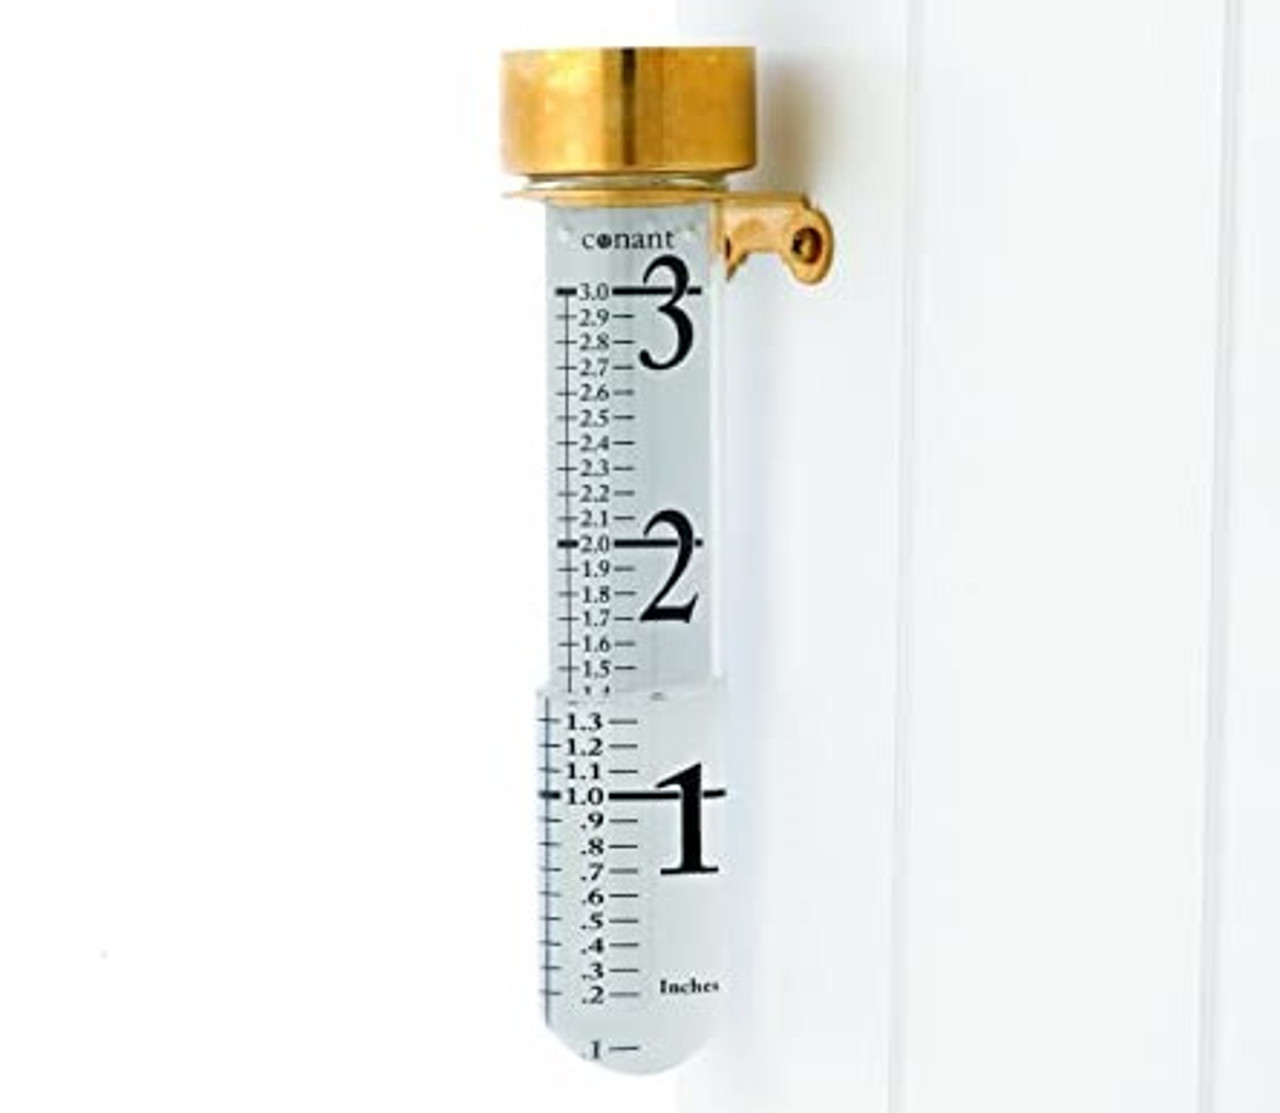 Vermont Copper Dial Thermometer by Conant Custom Brass